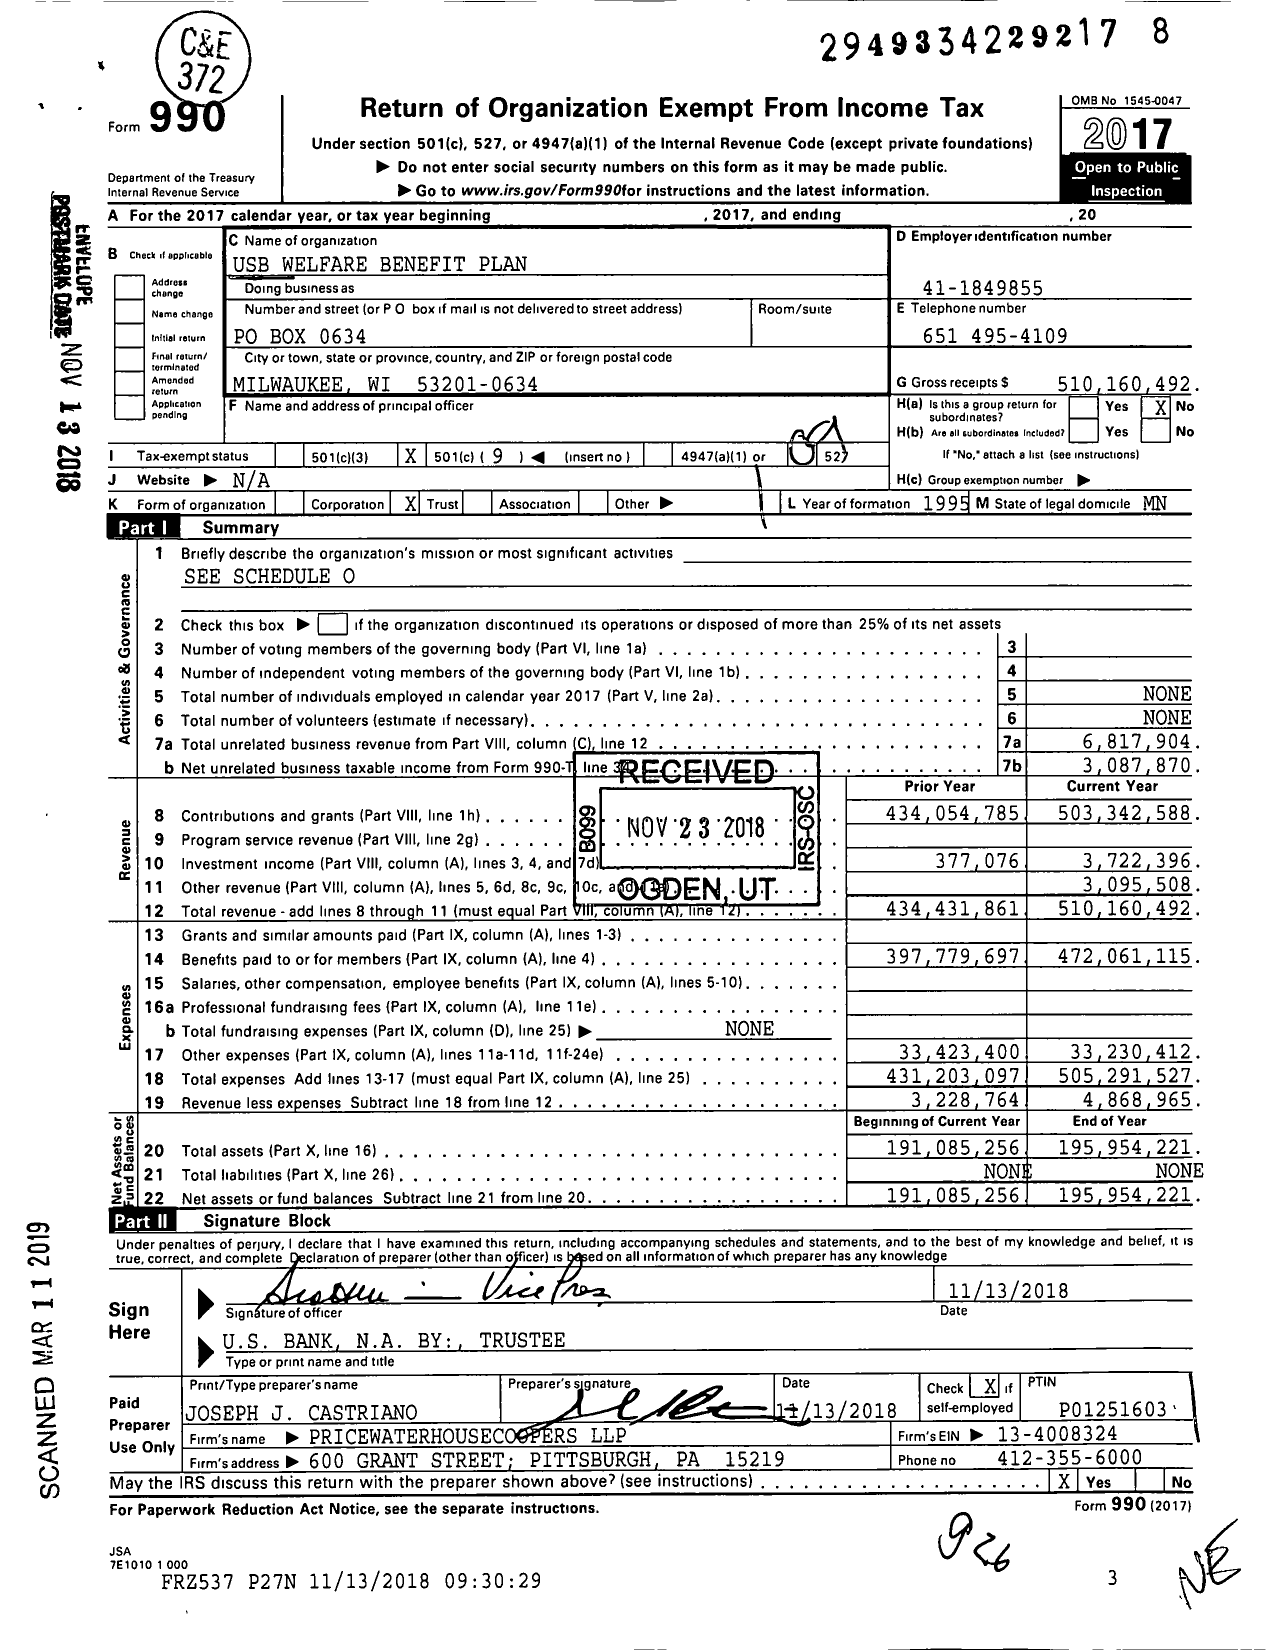 Image of first page of 2017 Form 990O for Usb Welfare Benefit Plan